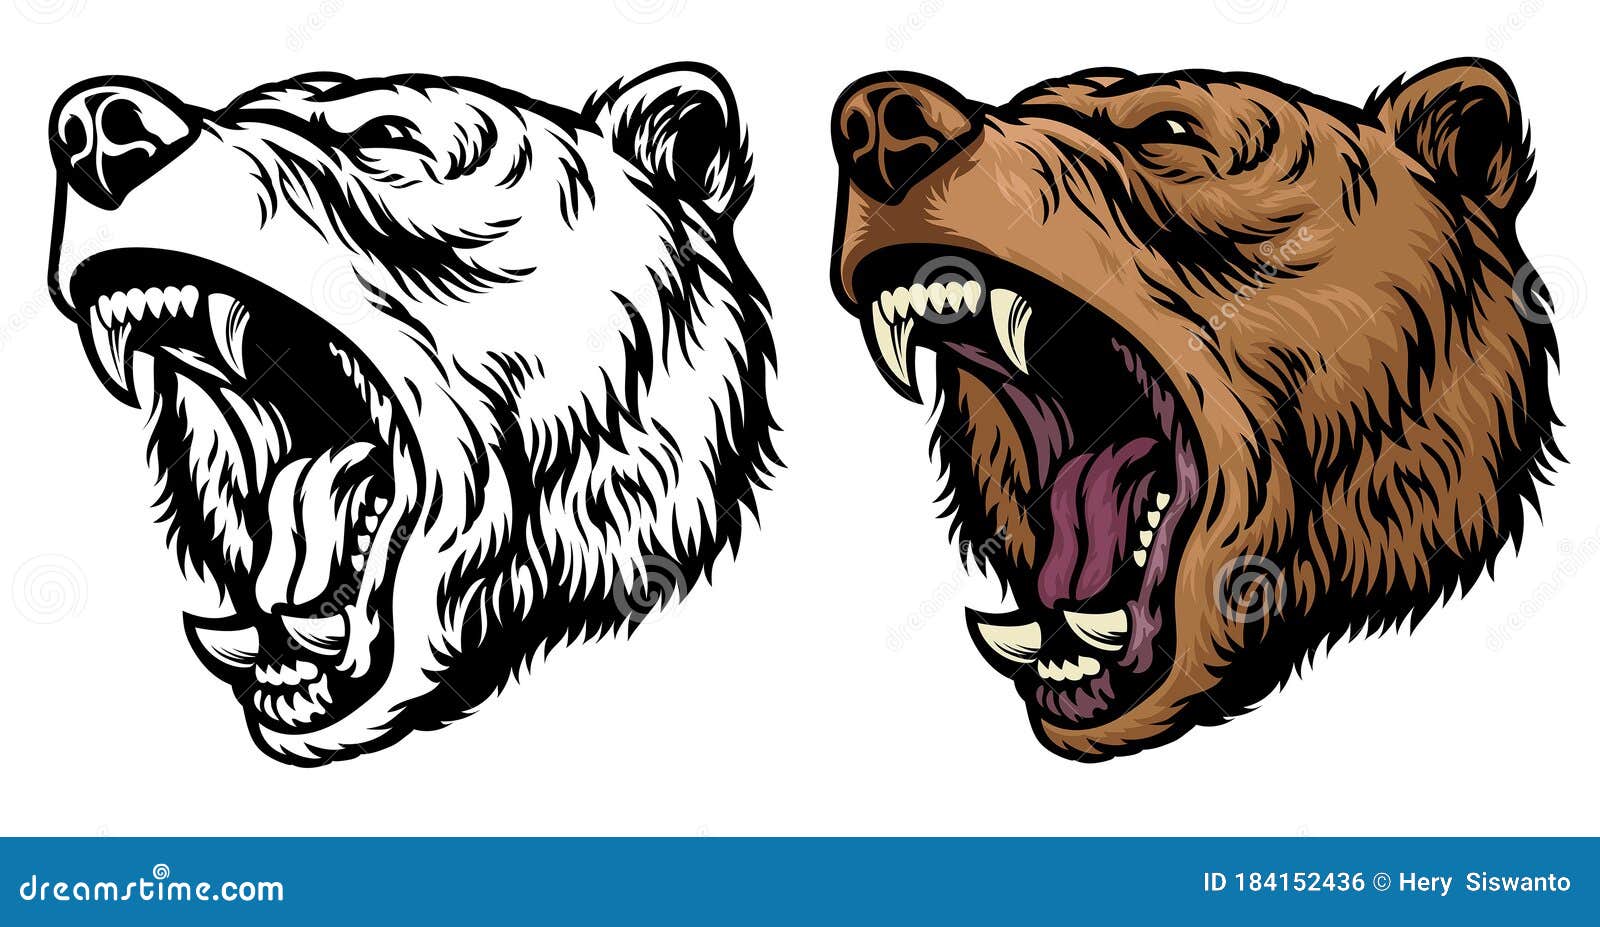 Angry Roaring Grizzly Bear Head Stock Vector - Illustration of animal